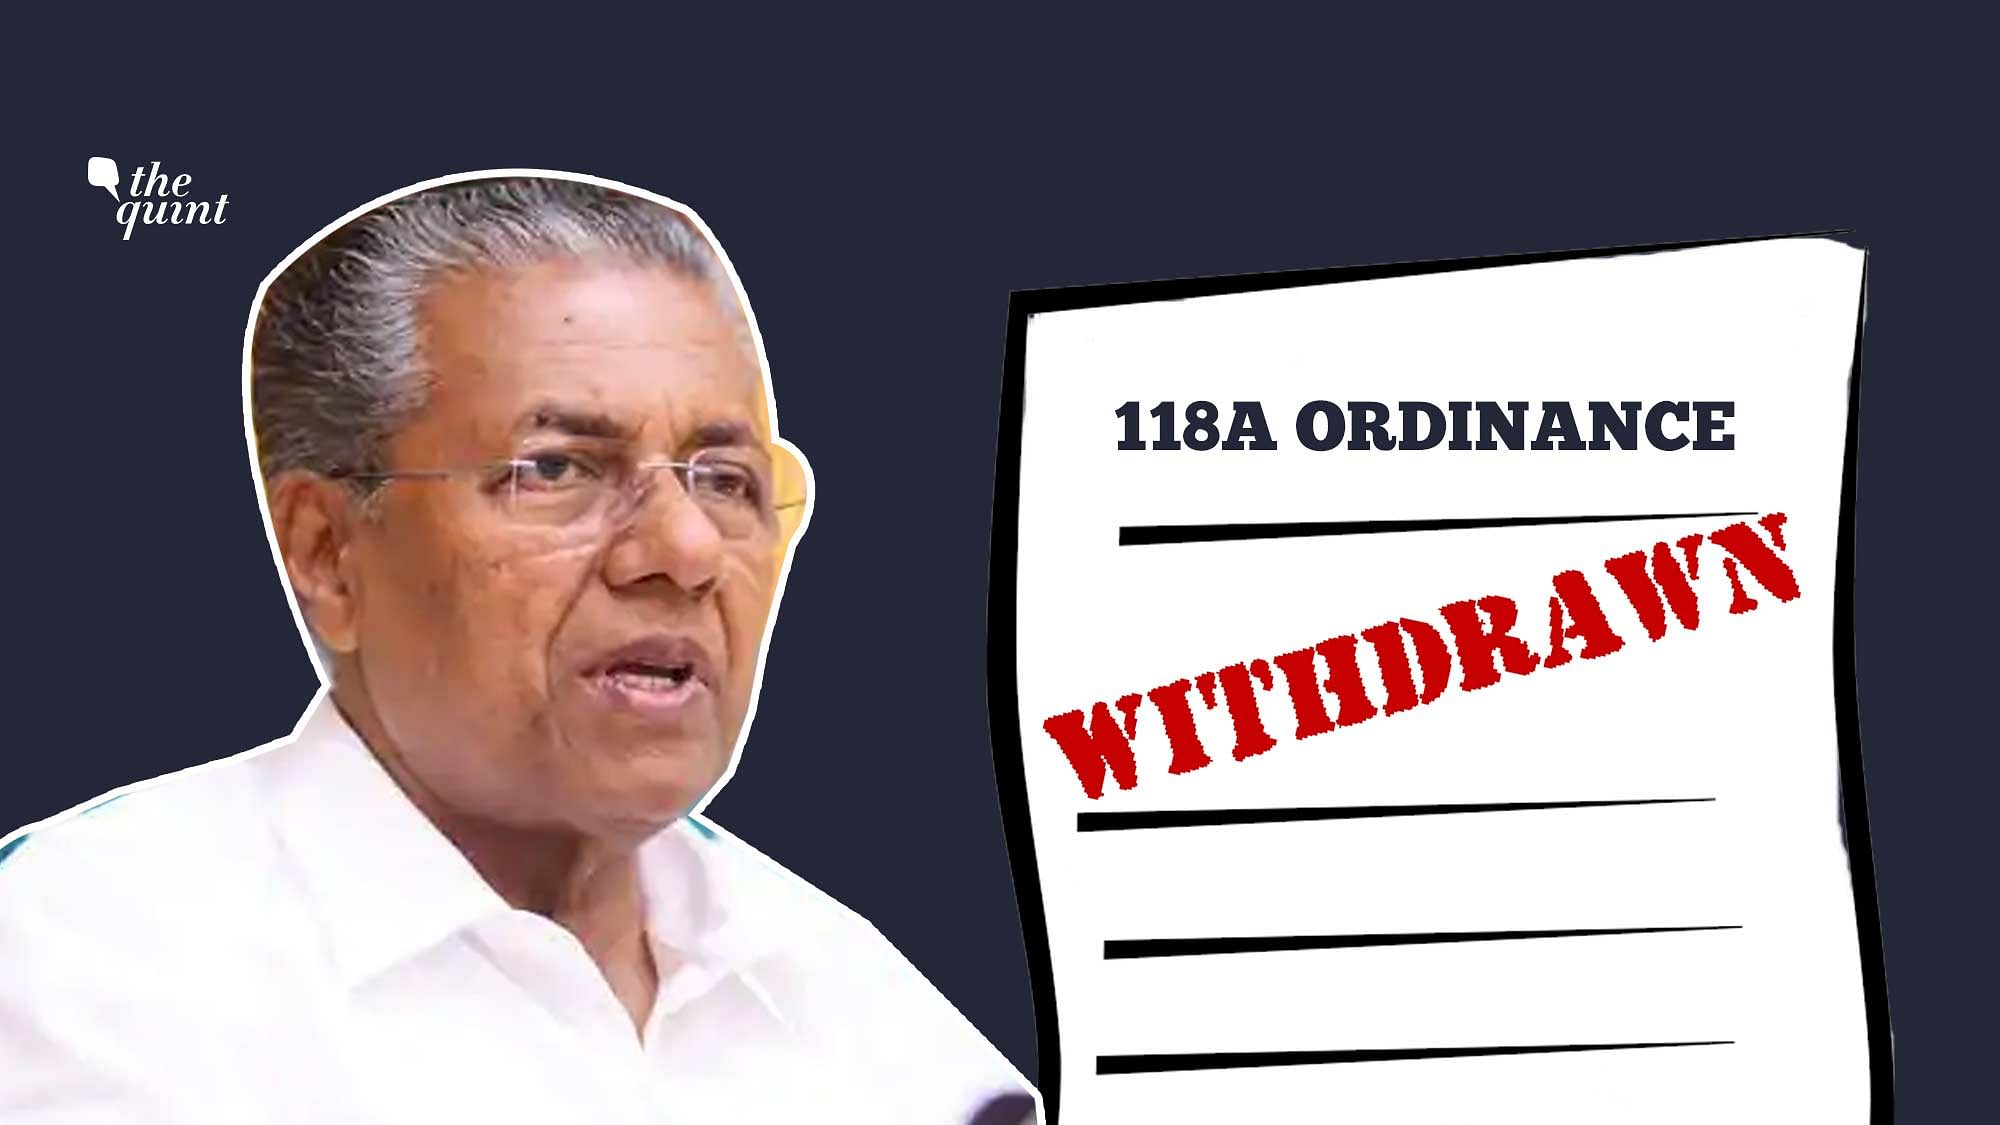 Kerala CM Pinarayi Vijayan’s government has introduced a new ordinance to withdraw the earlier one amending the Kerala Police Act, which came in for severe criticism.